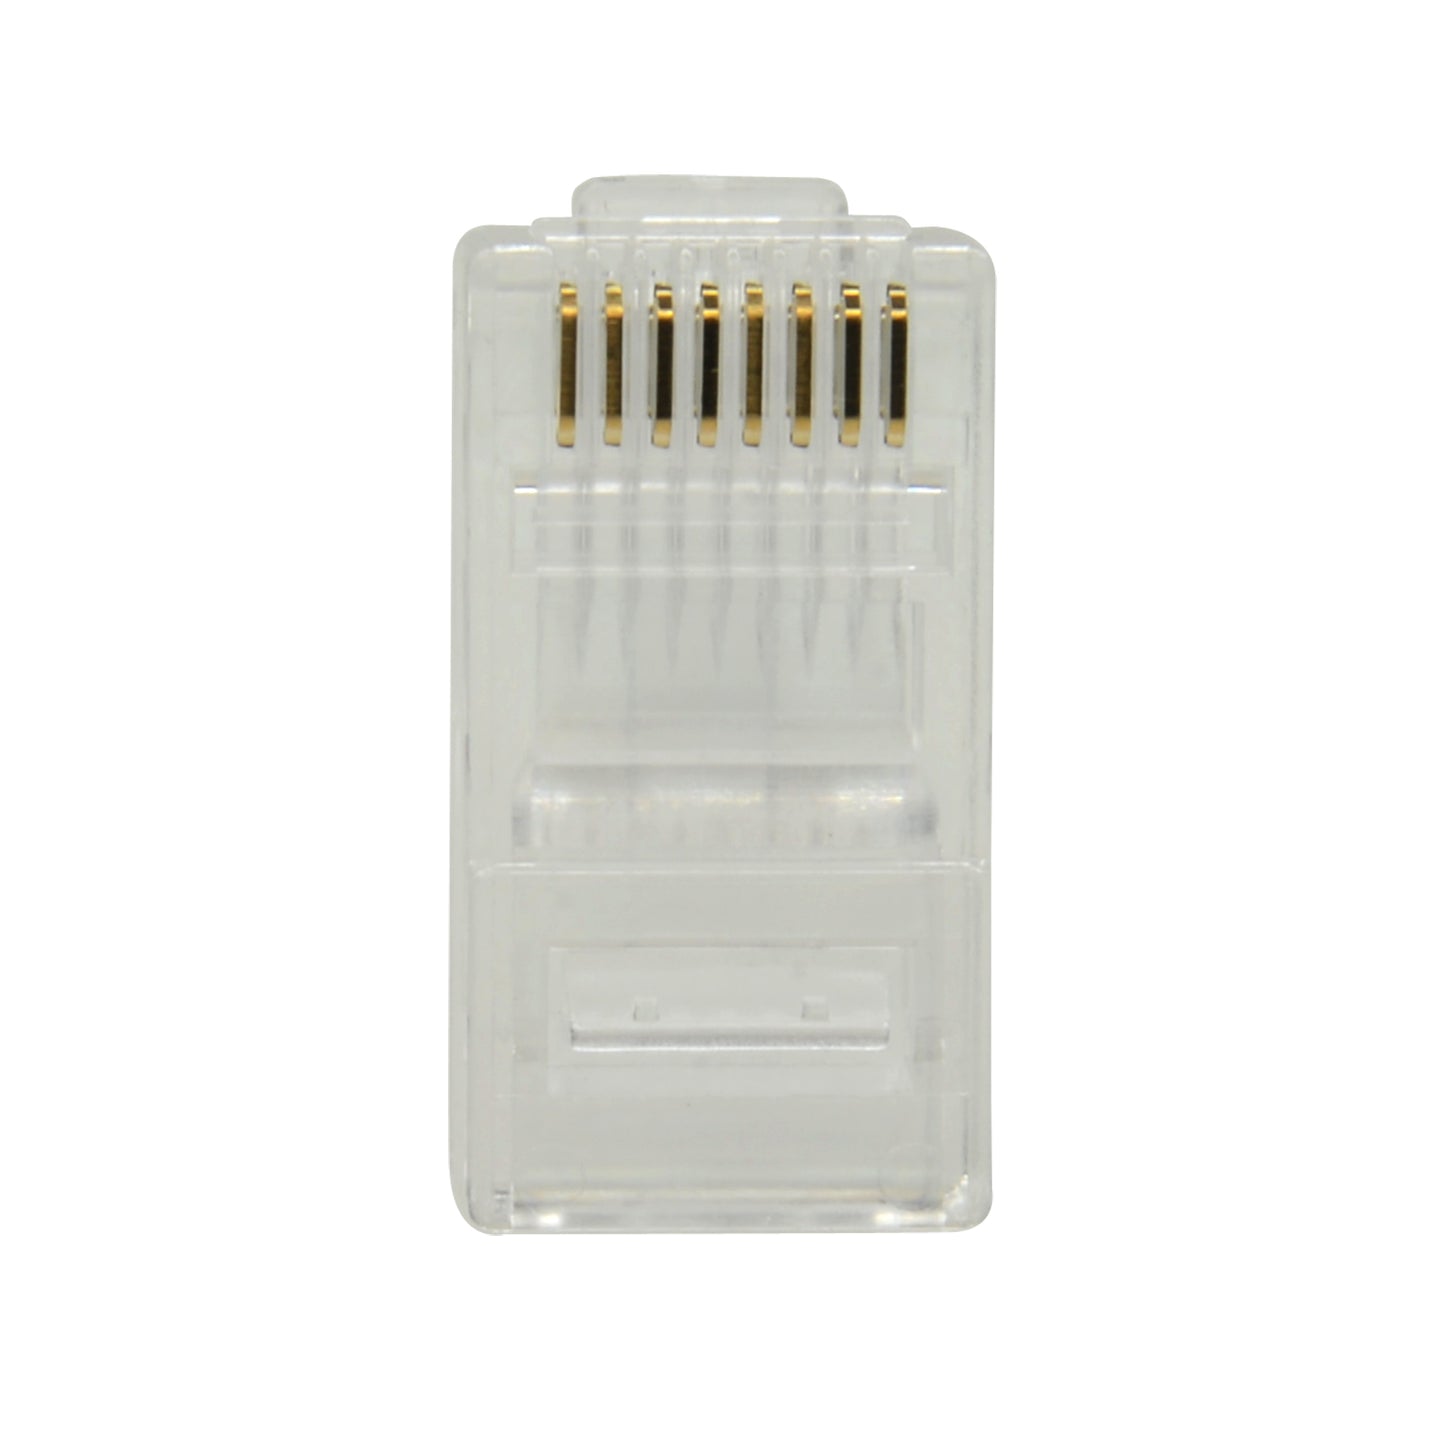 Connector - RJ45 for crimping - Compatible with UTP cable - 20mm (Fo) - 10mm (An) - 5g